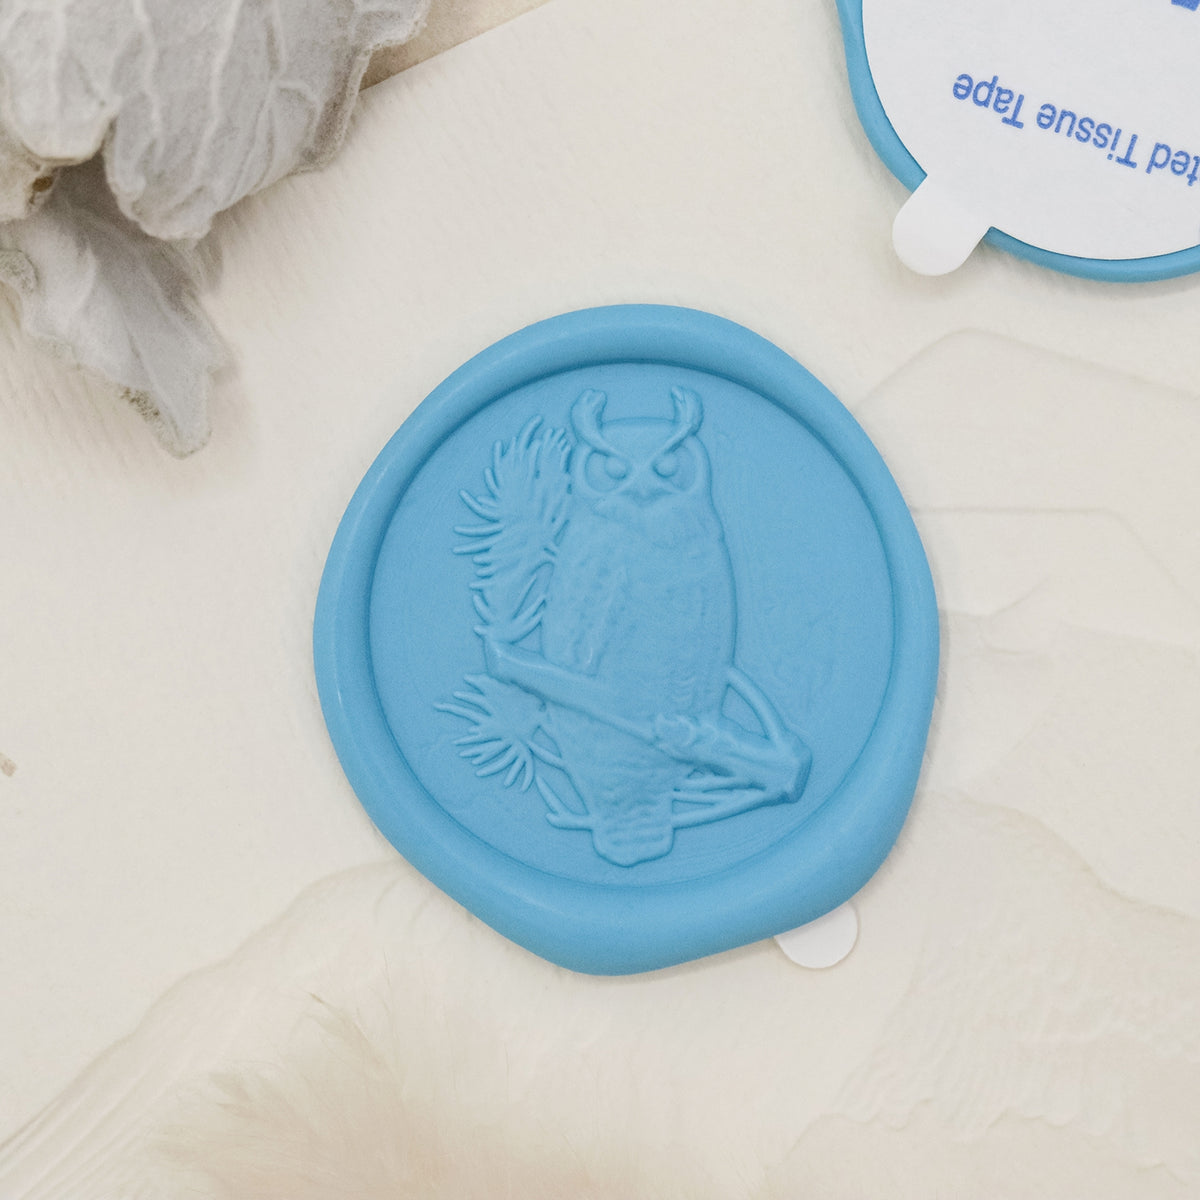 Stamprints 3D Relief Night Owl Self-adhesive Wax Seal Stickers 1